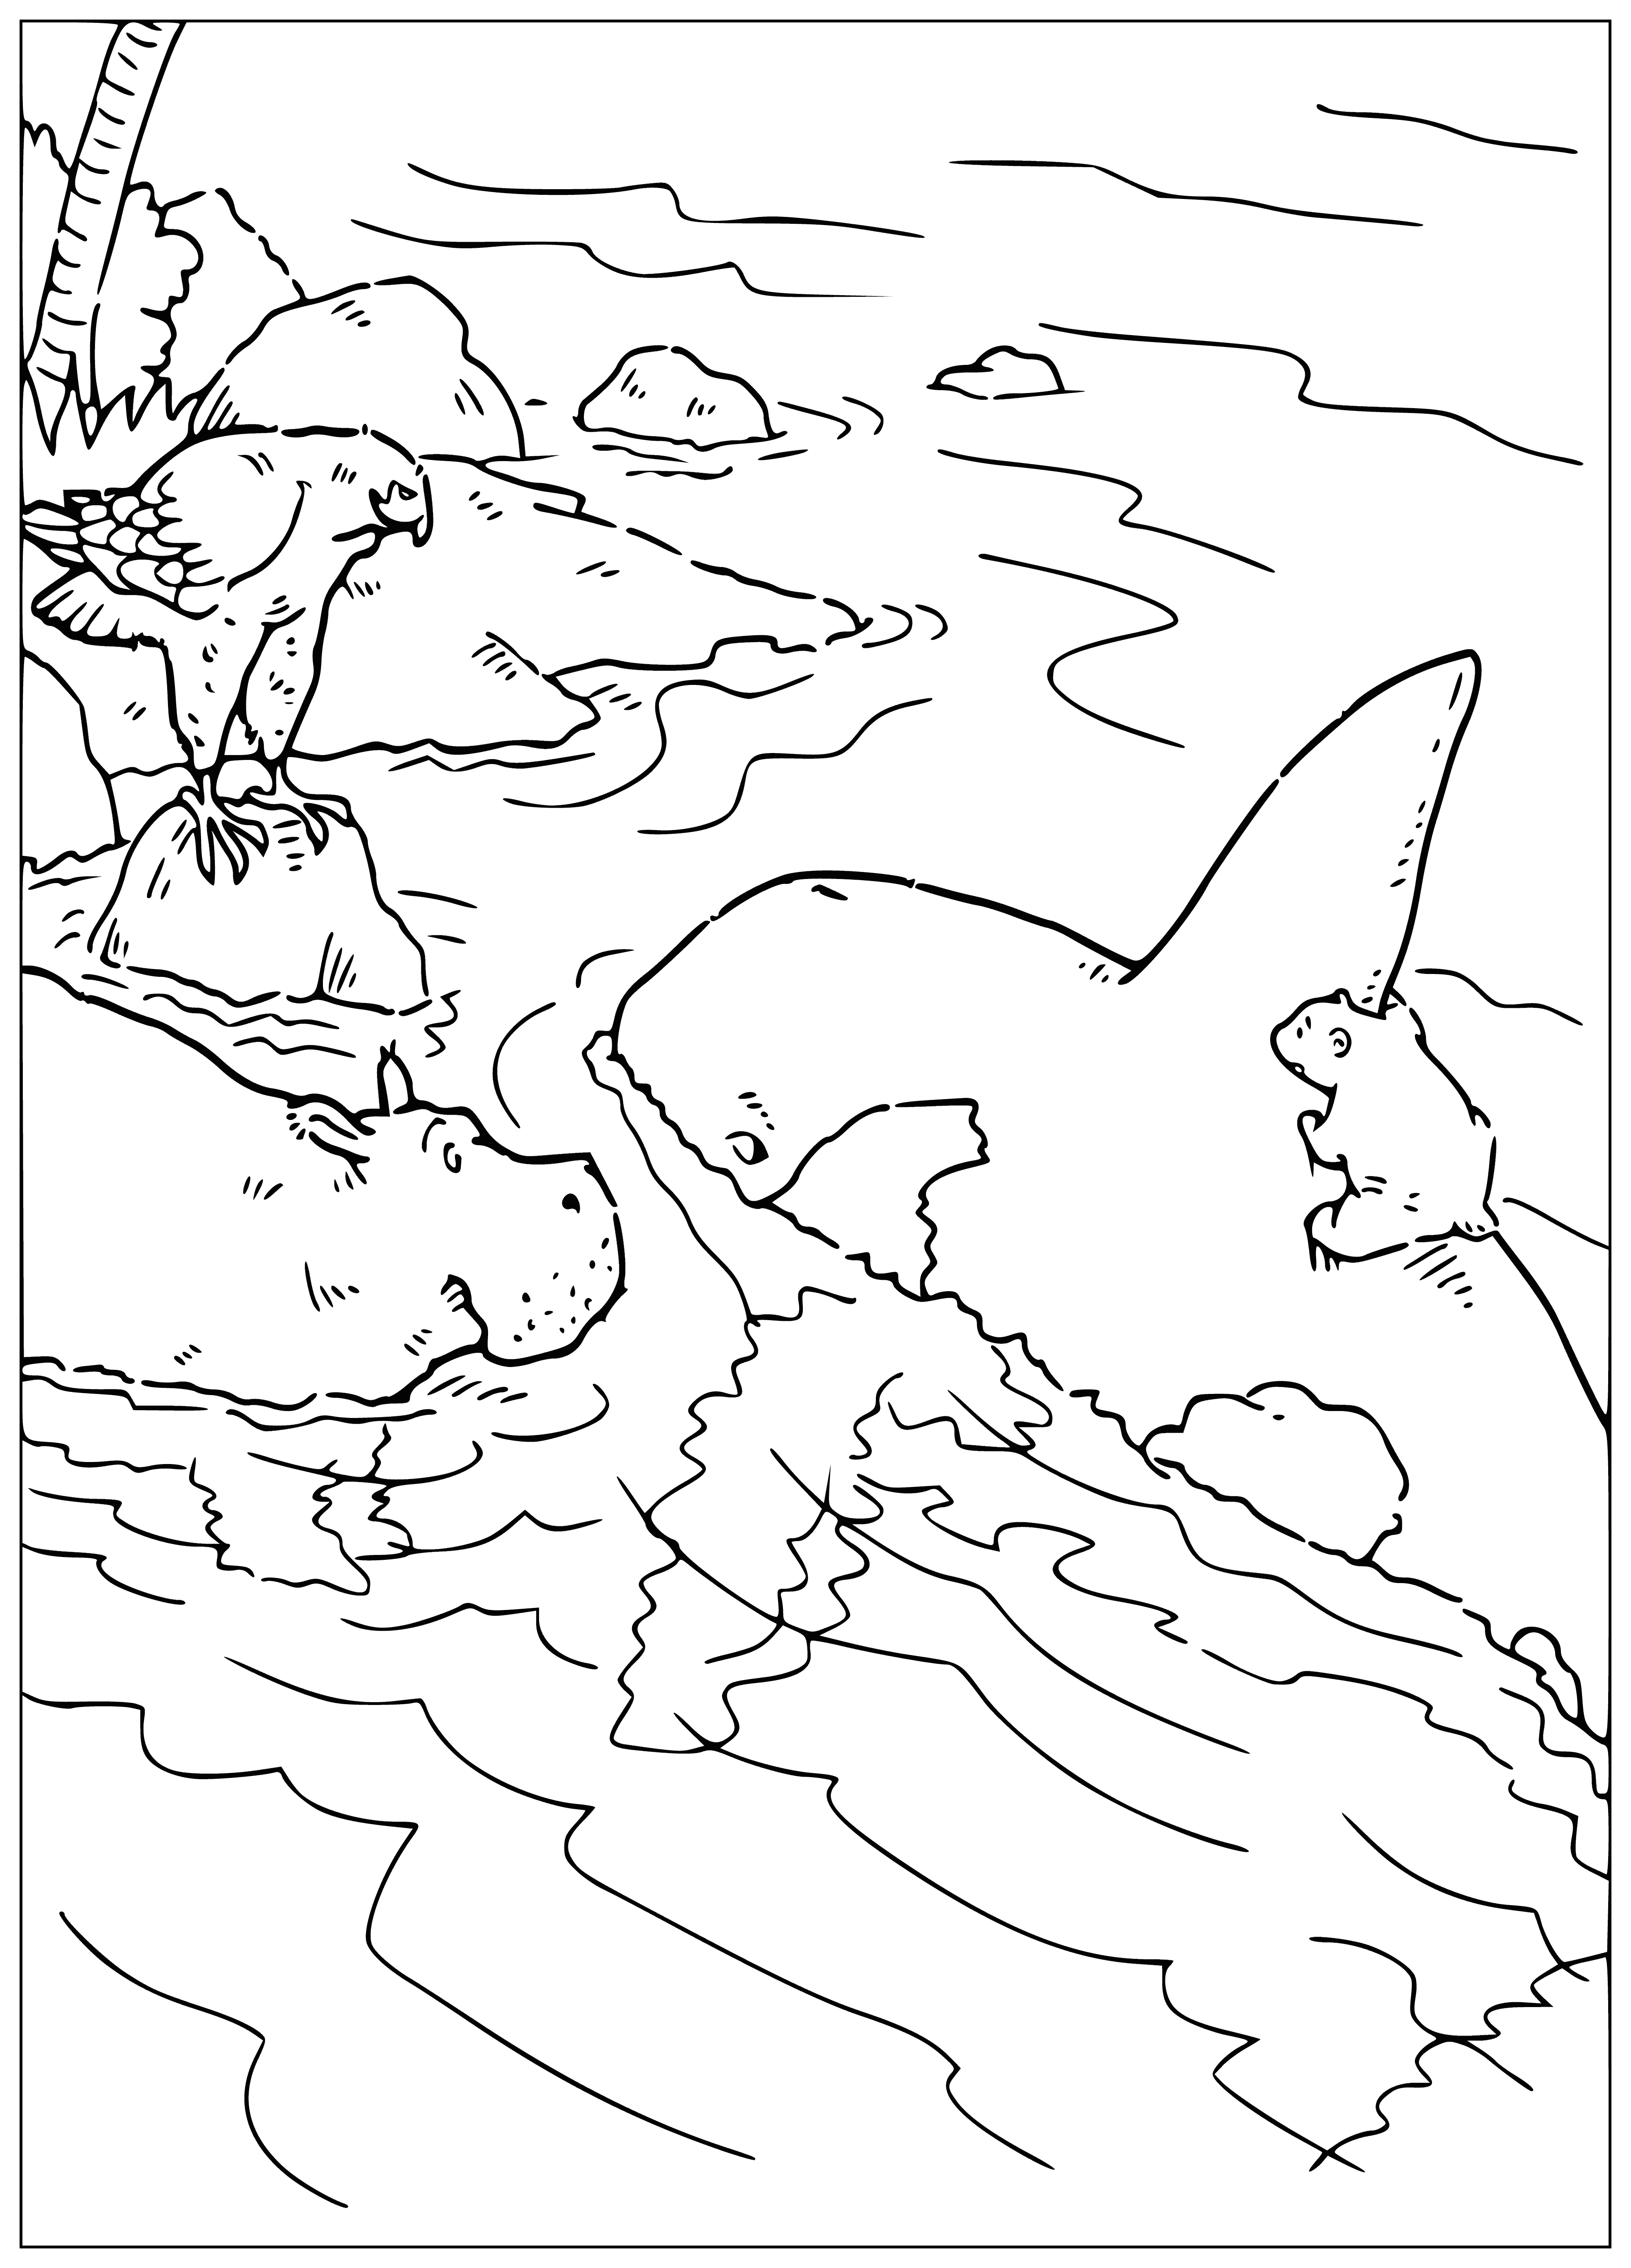 Riding a killer whale coloring page